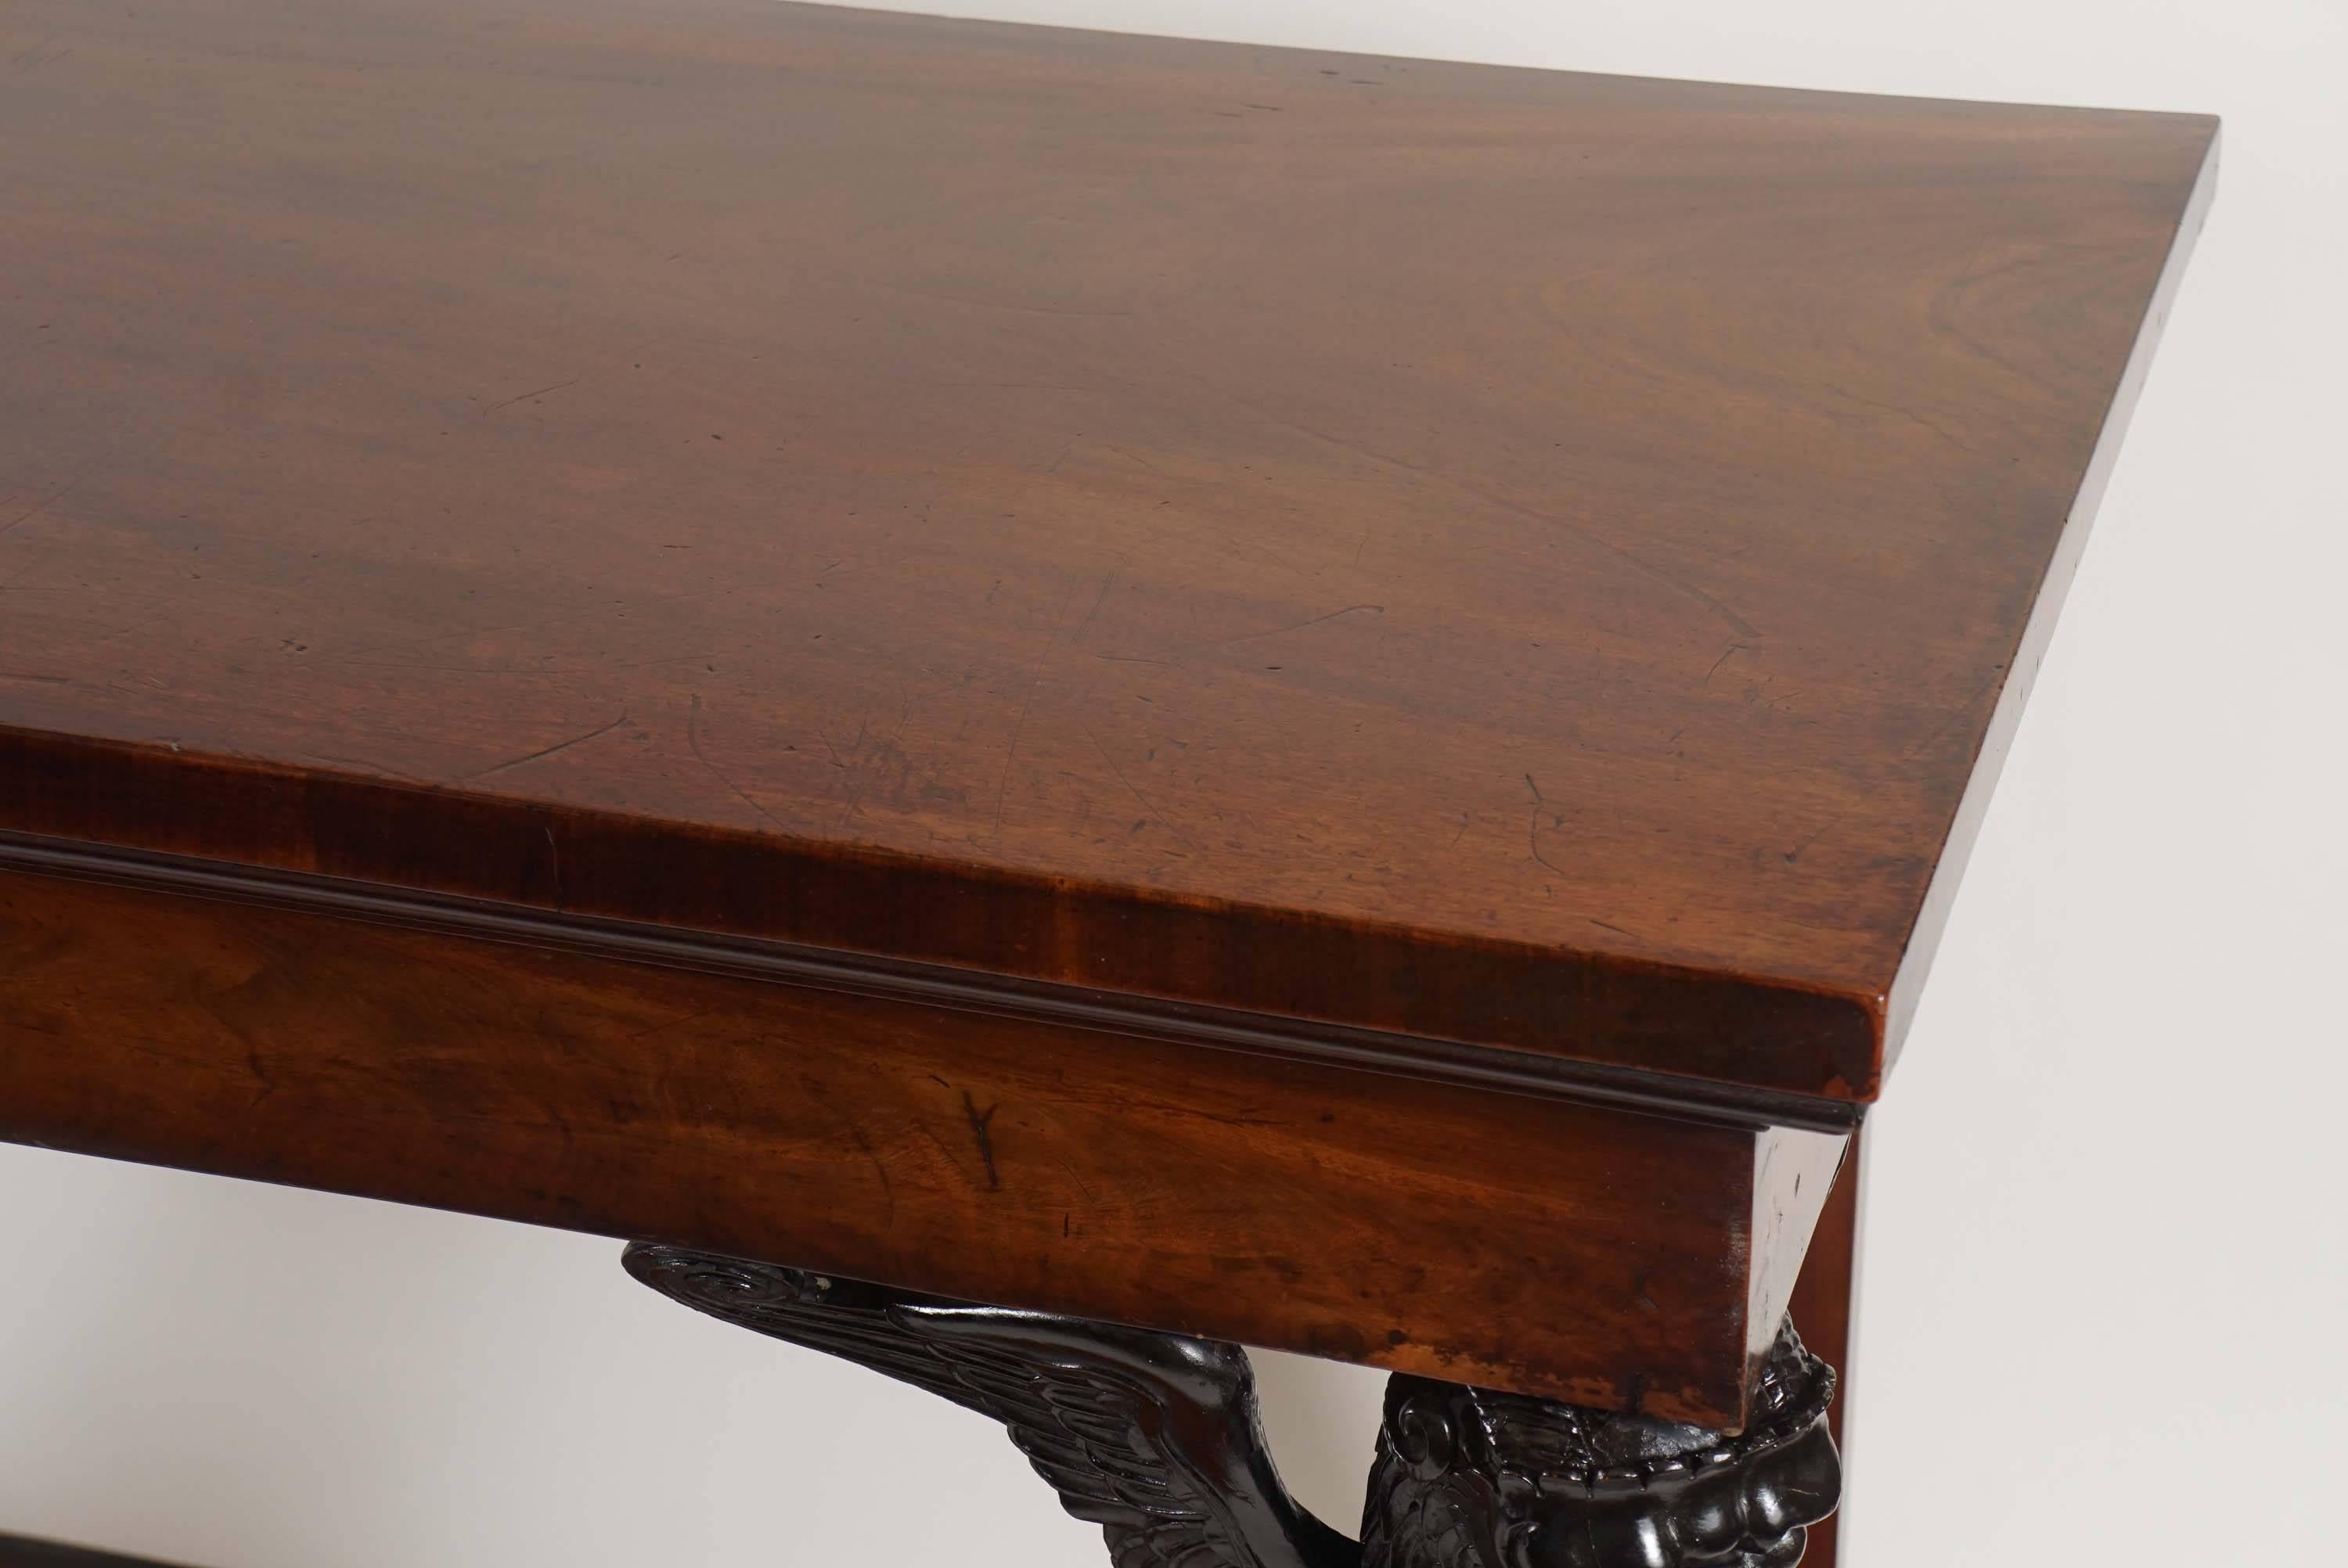 An important and exceptional neoclassical English Regency period mahogany side table, serving table, or sideboard of monumental size in the manner of Thomas Hope of rectangular form having blunt-edge top above 'echinus' and stepped fillet molding